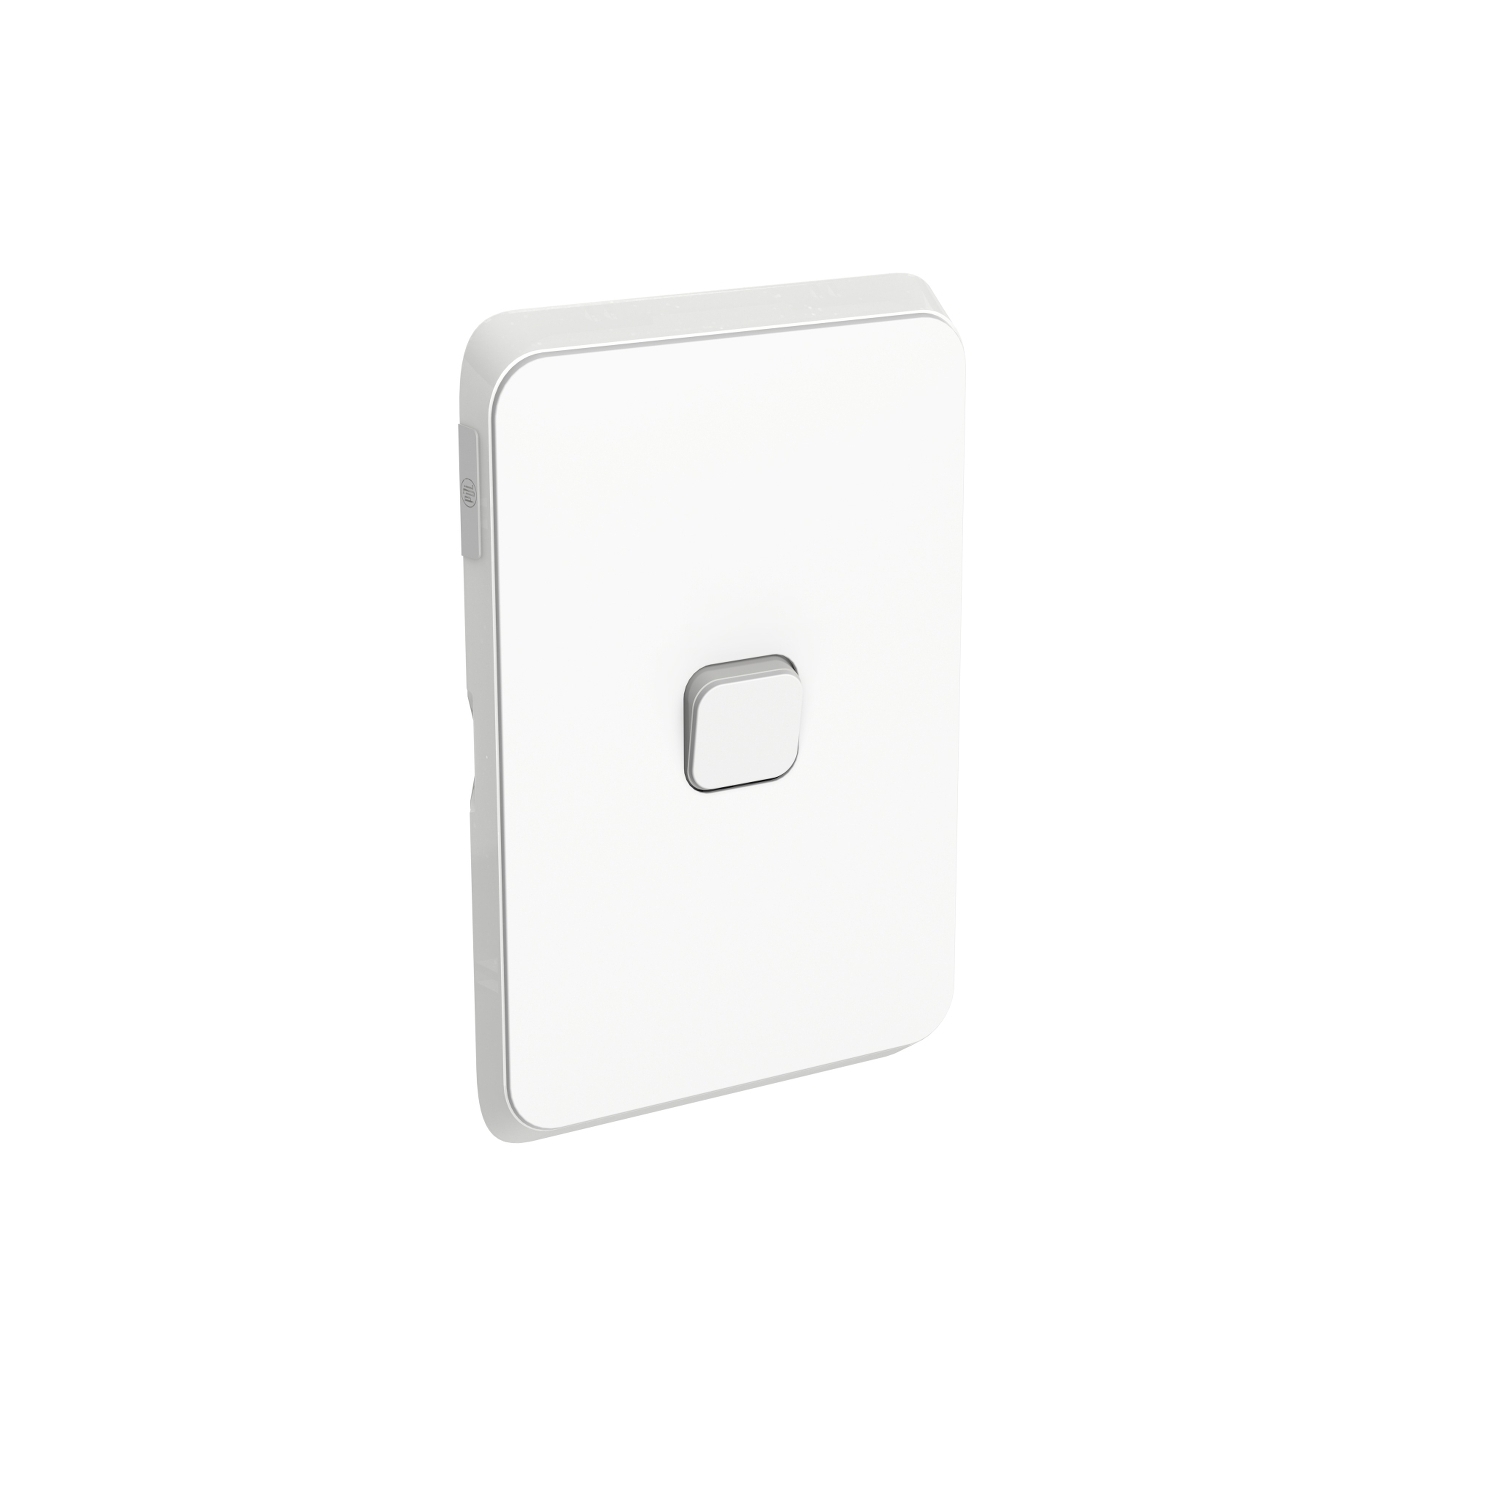 PDL381C-VW - PDL Iconic Cover Plate Switch 1Gang - Vivid White